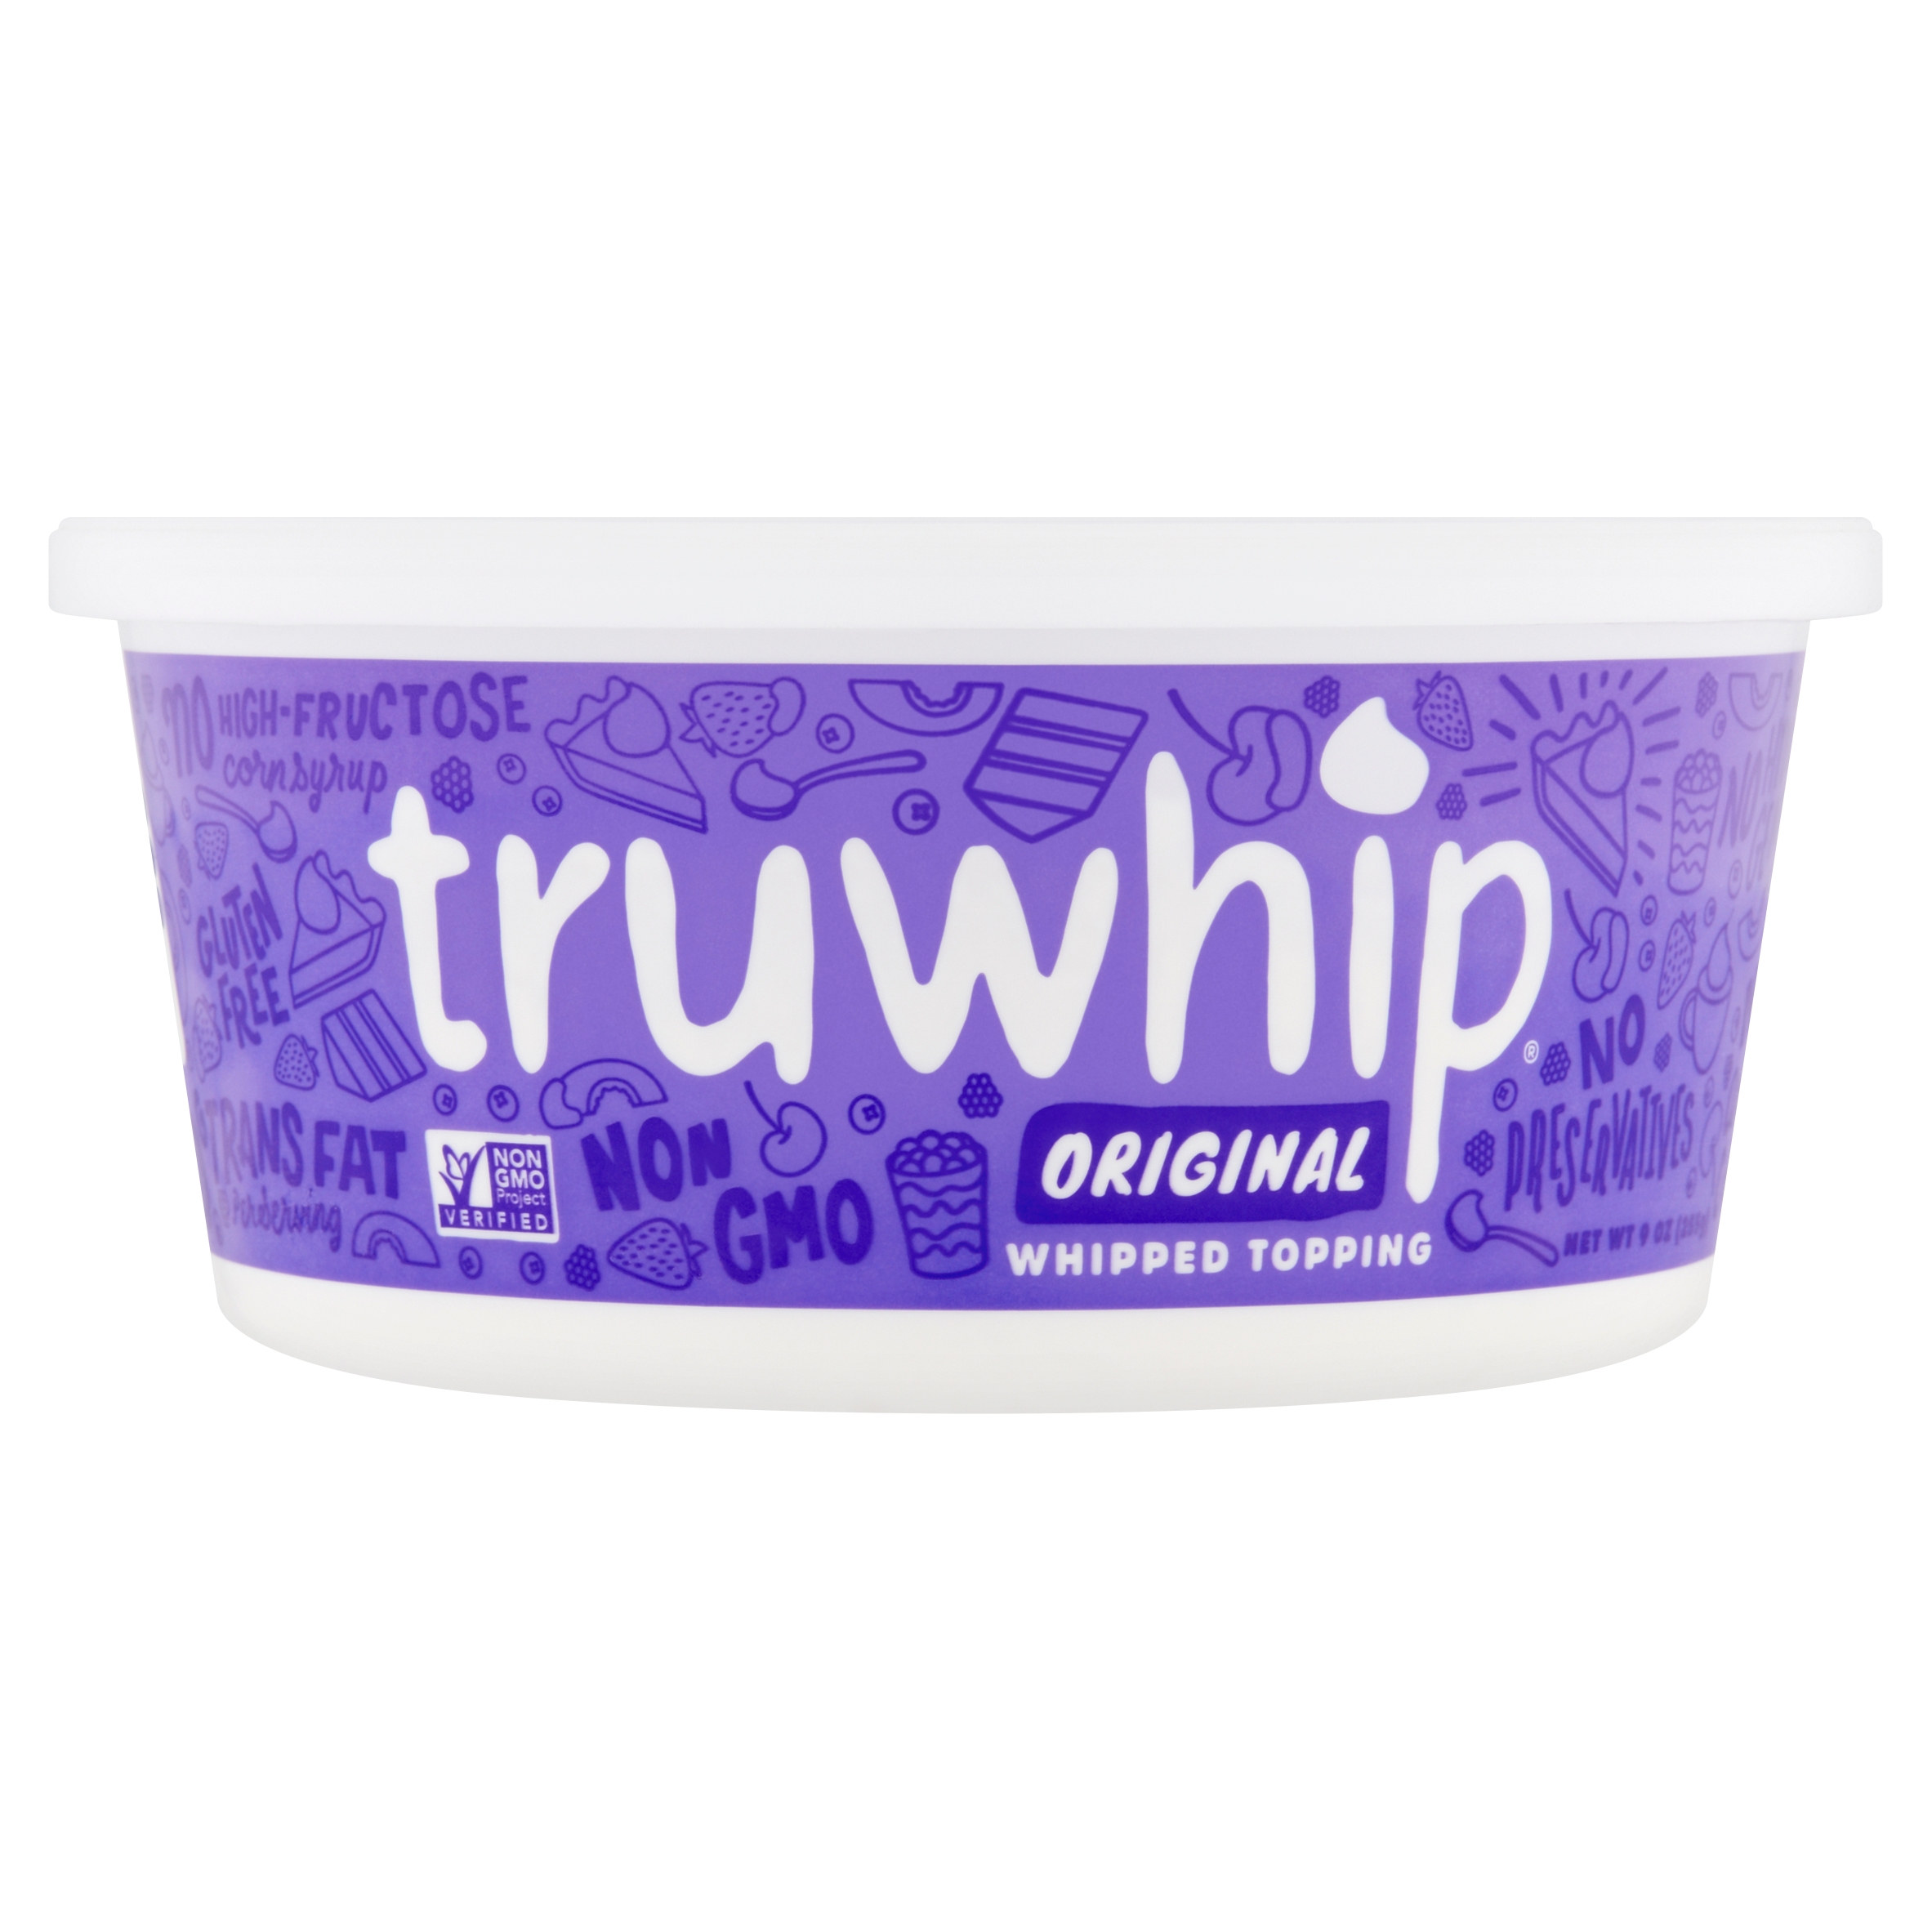 Truwhip Original Whipped Topping, Frozen Dessert Topping, 9 oz - image 2 of 7